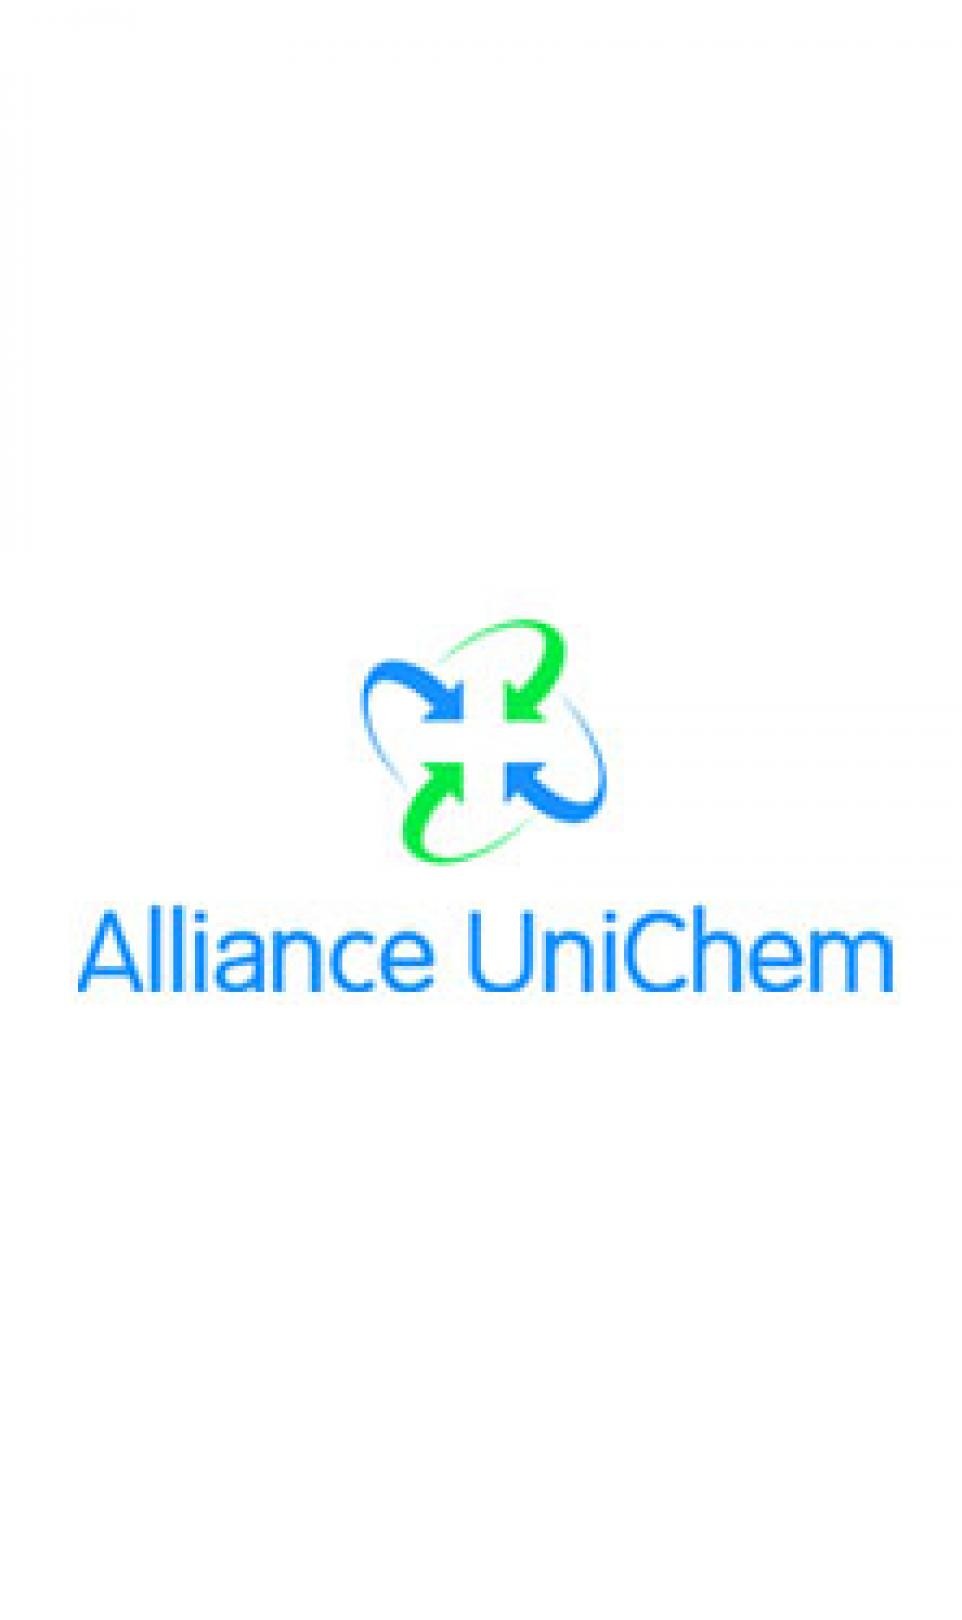 The blue and green Alliance UniChem logo, pictured on a white background